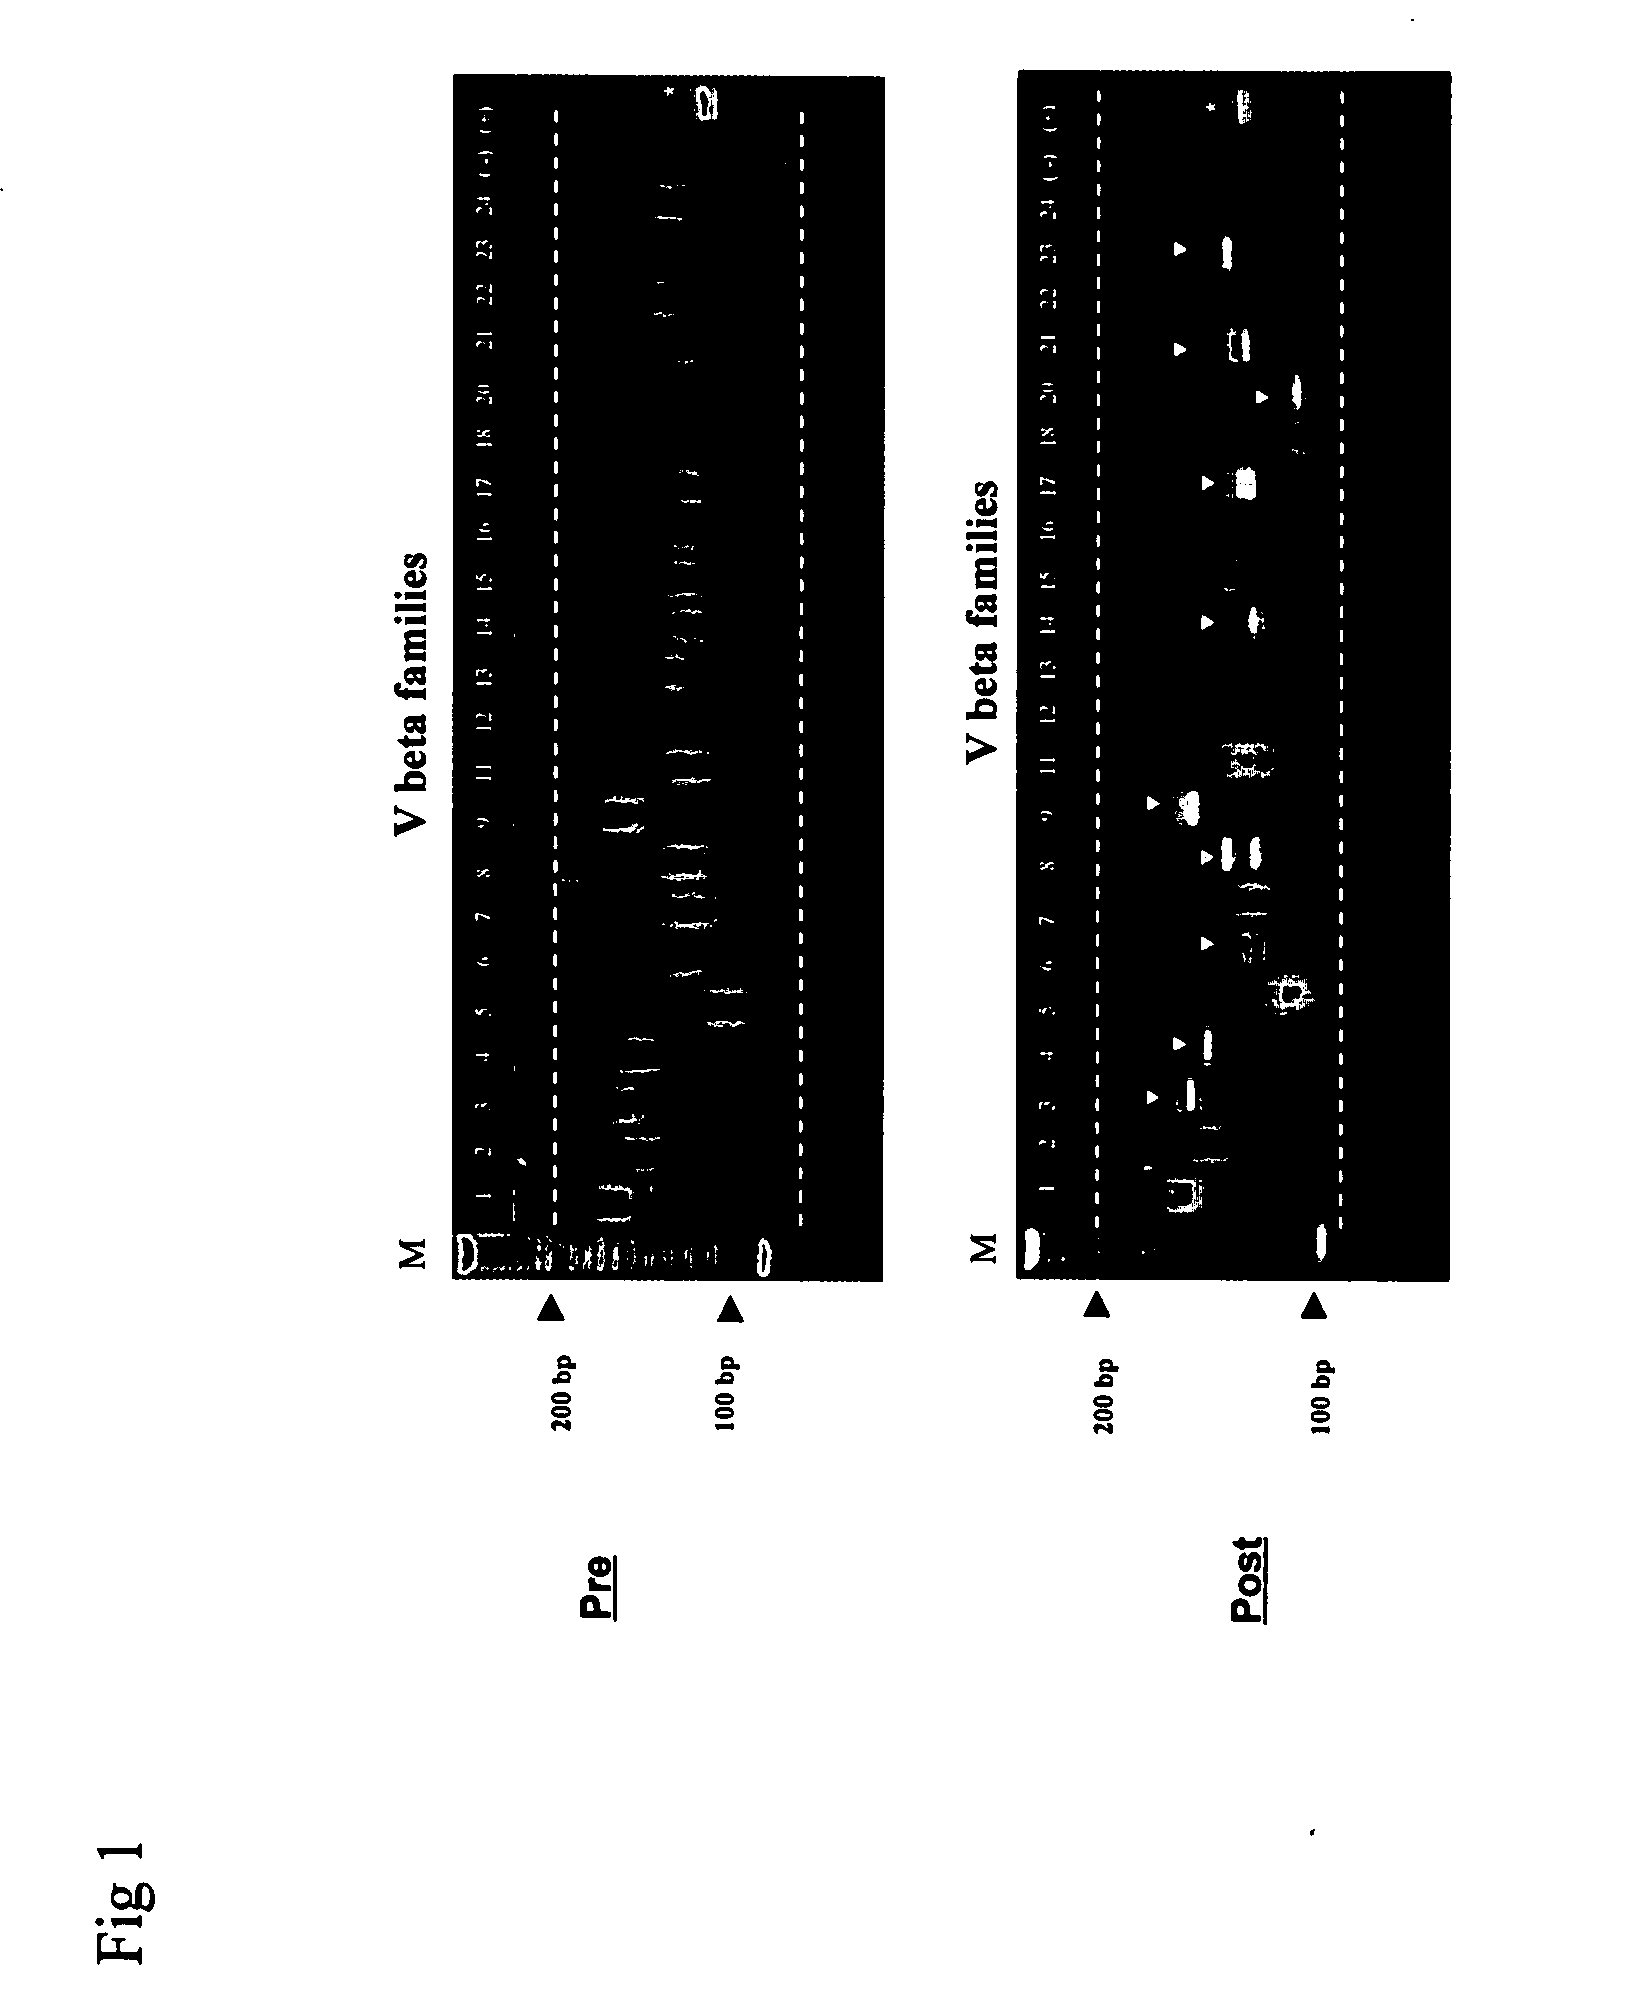 Method for detection and quantification of T-cell receptor Vbeta repertoire